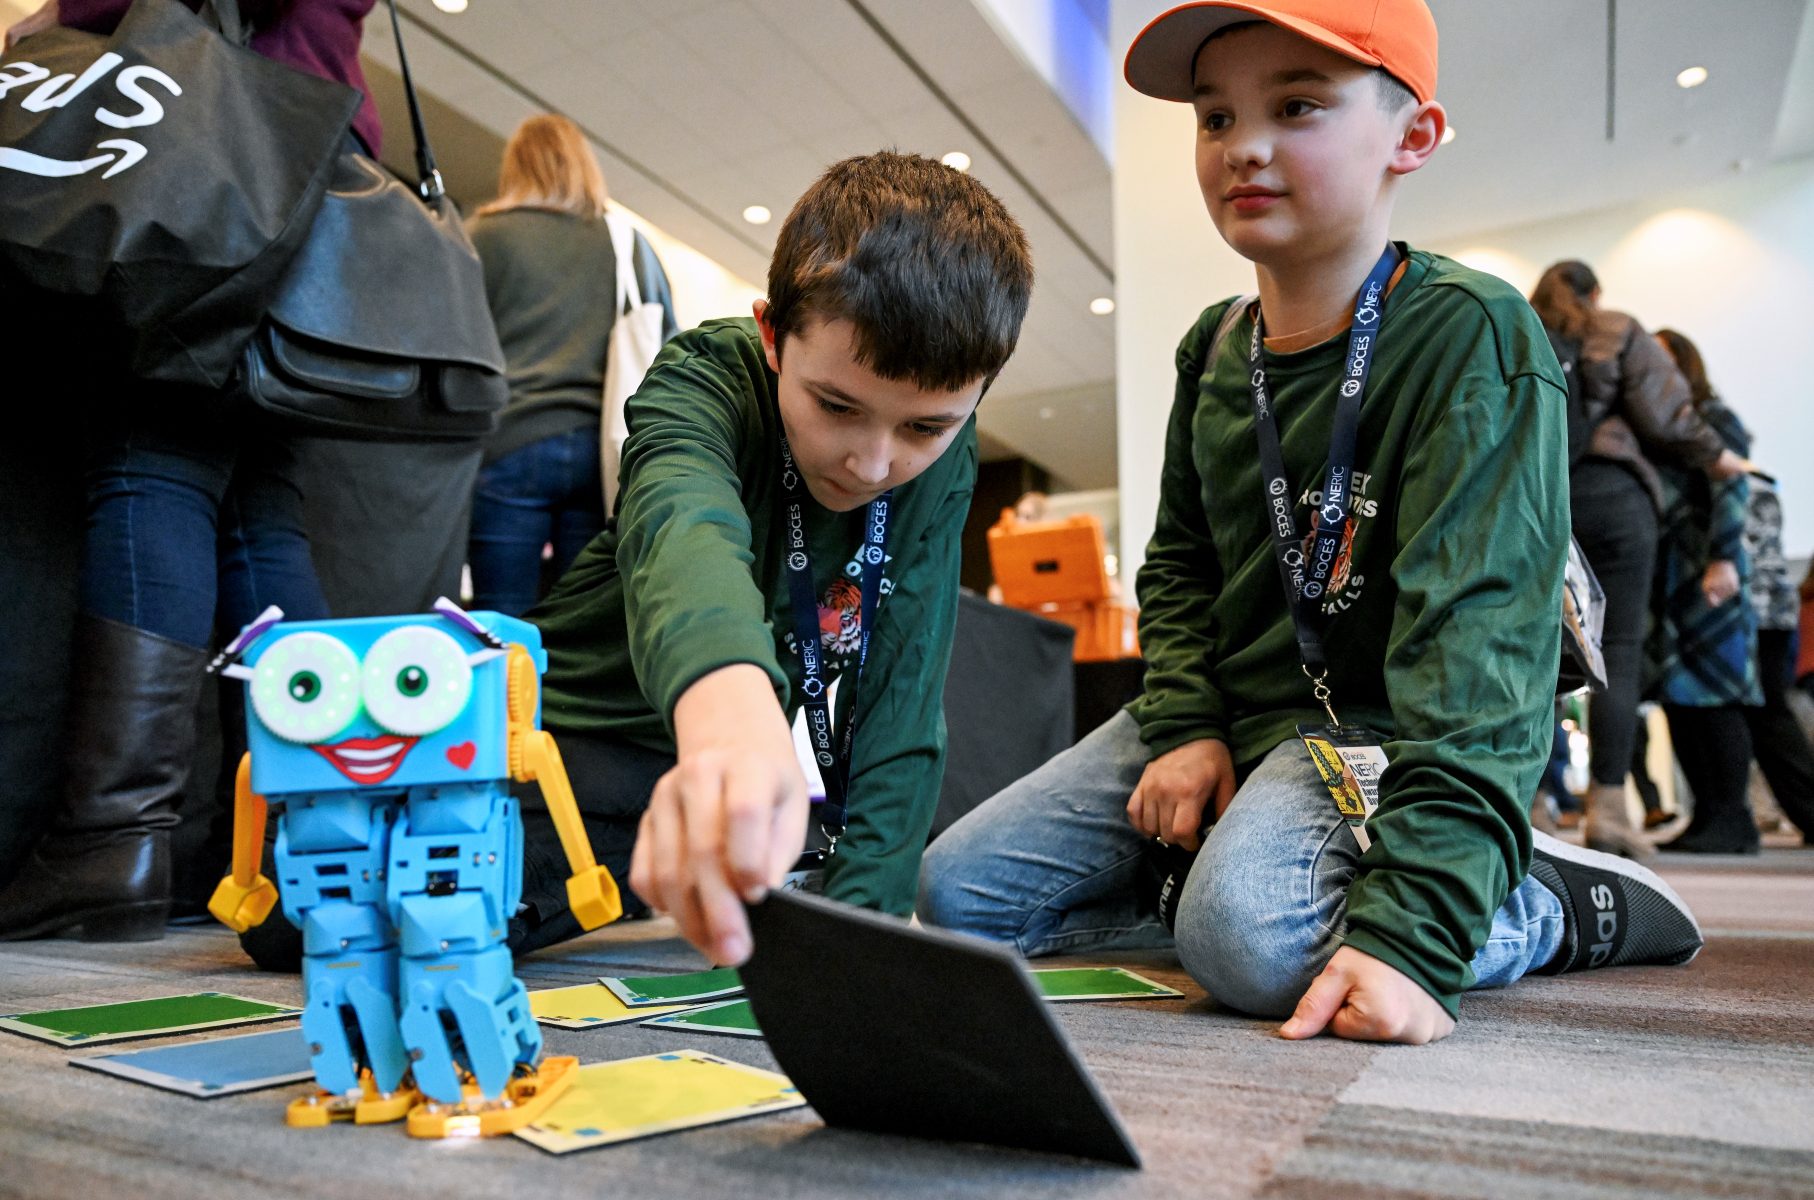 Two young boys sitting on the floor, participate in friendly technological exercise.